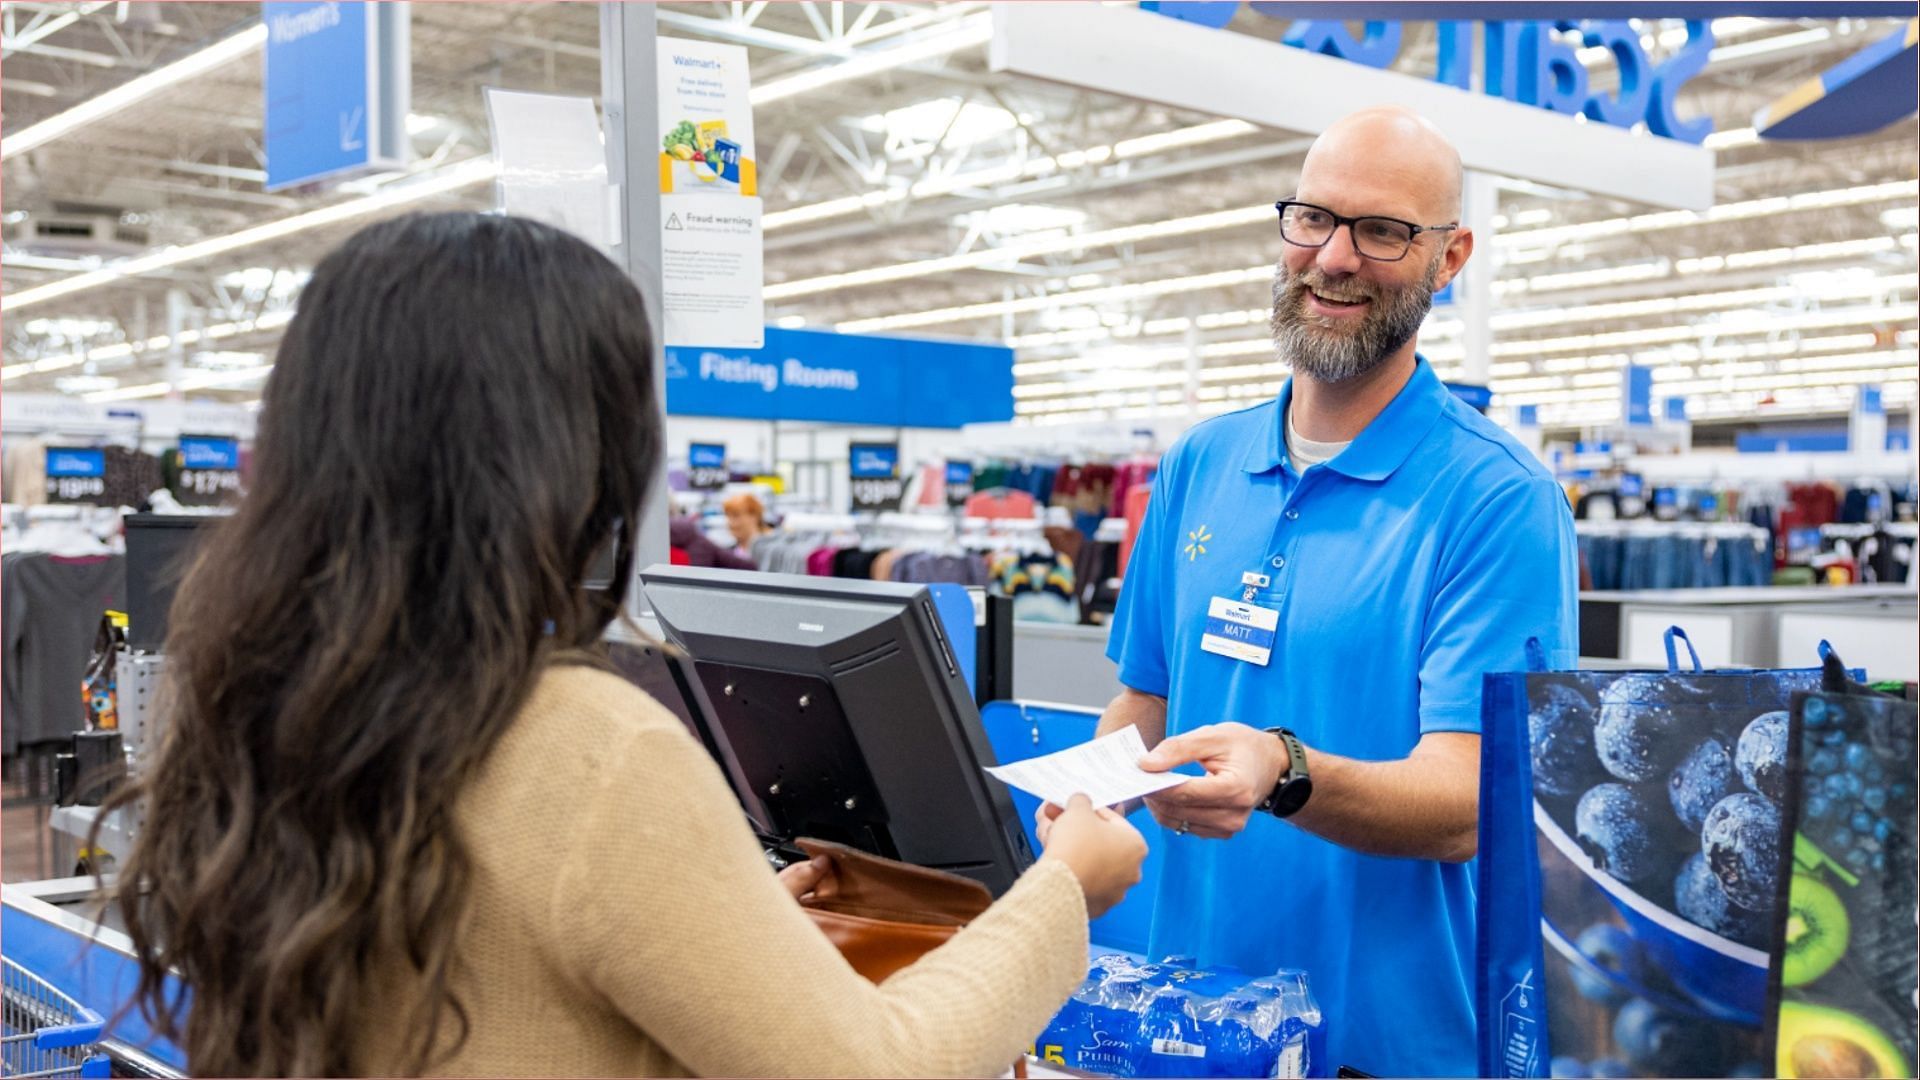 Most retailers including Walmart will open early on Black Friday (Image via Walmart)